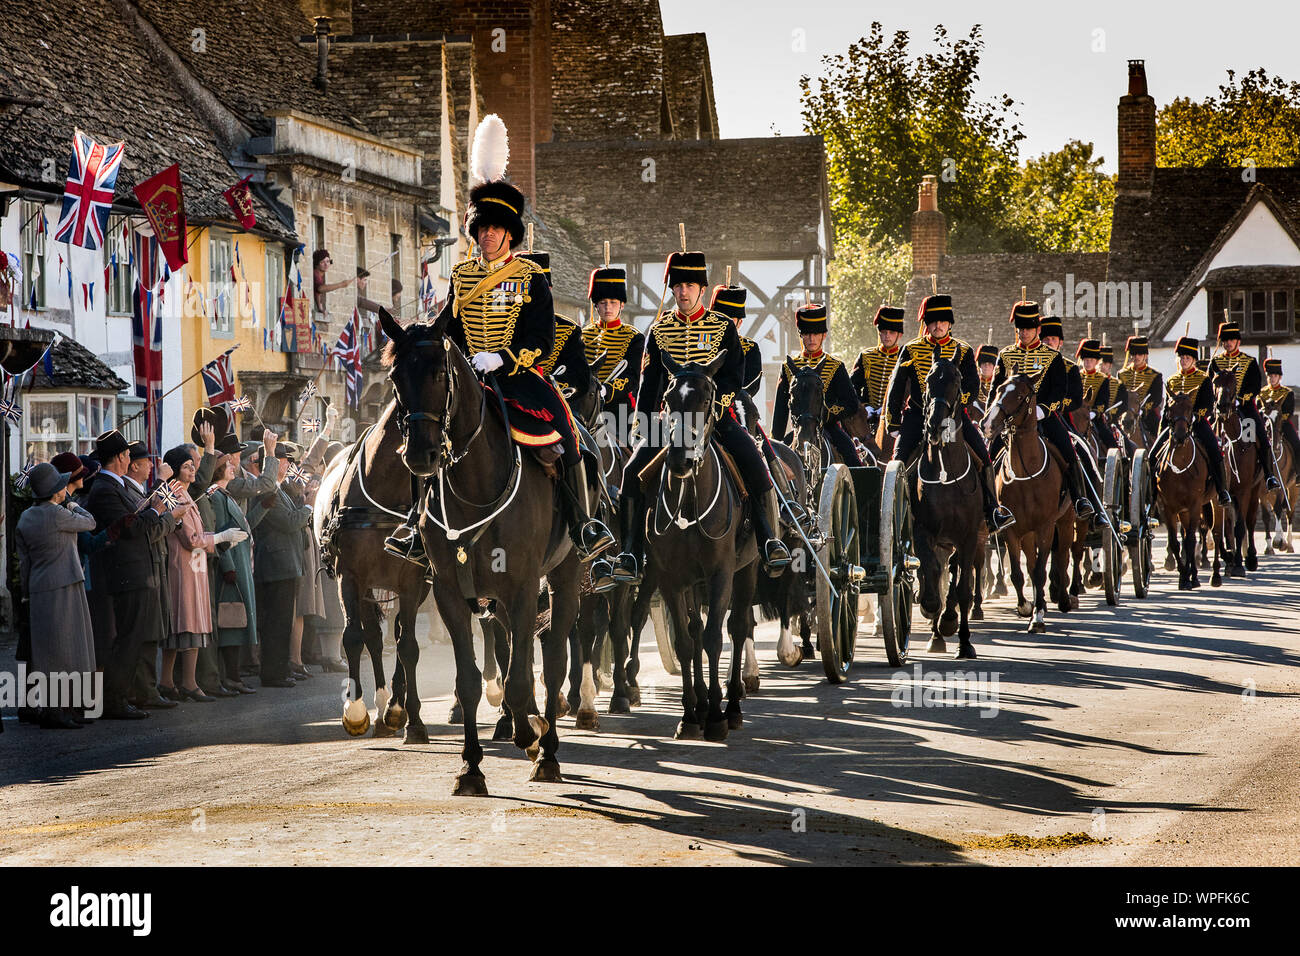 The Kings Troop Royal Horse Artillery during the shooting of a film version of smash TV hit Downton Abbey for cinema. The scene was shot in the High St the National Trust village of Lacock in Wiltshire with 80 horses and Guns and over 250 extras cheering and waving flags as the parade passed by. Stock Photo